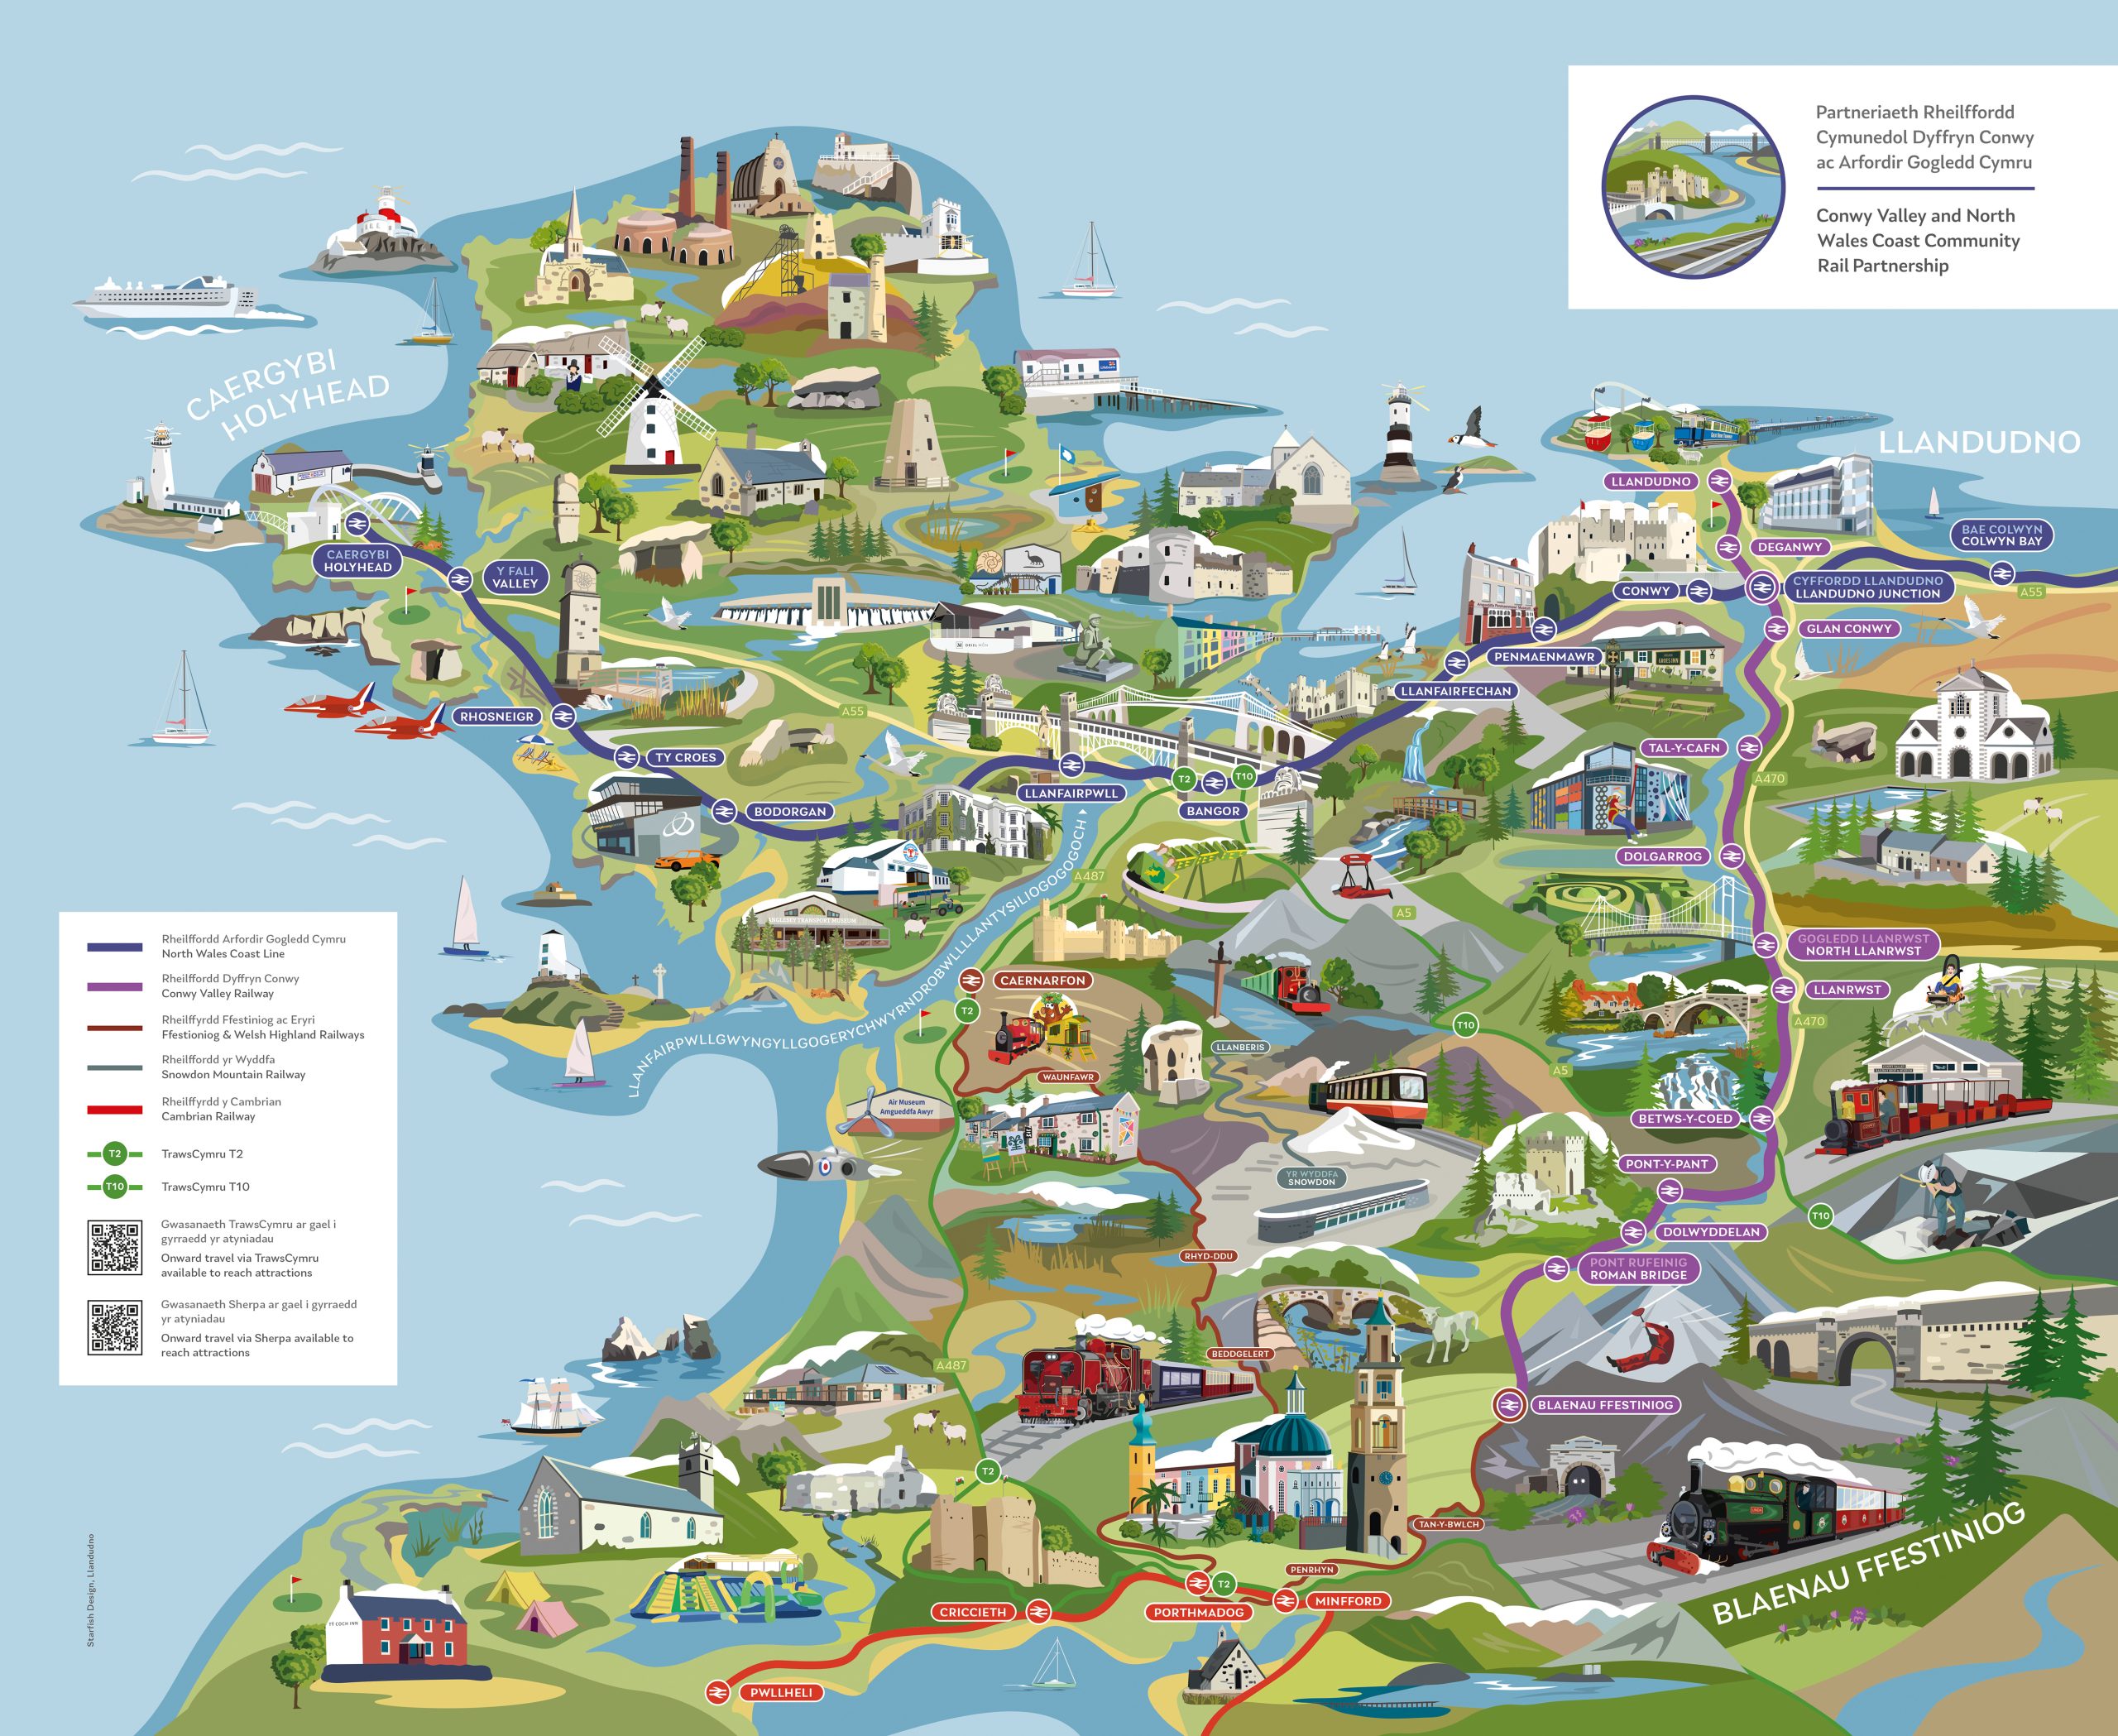 Colourful map with lots of illustrations depicting attractions along the Conwy Valley and North West Wales Coast Line